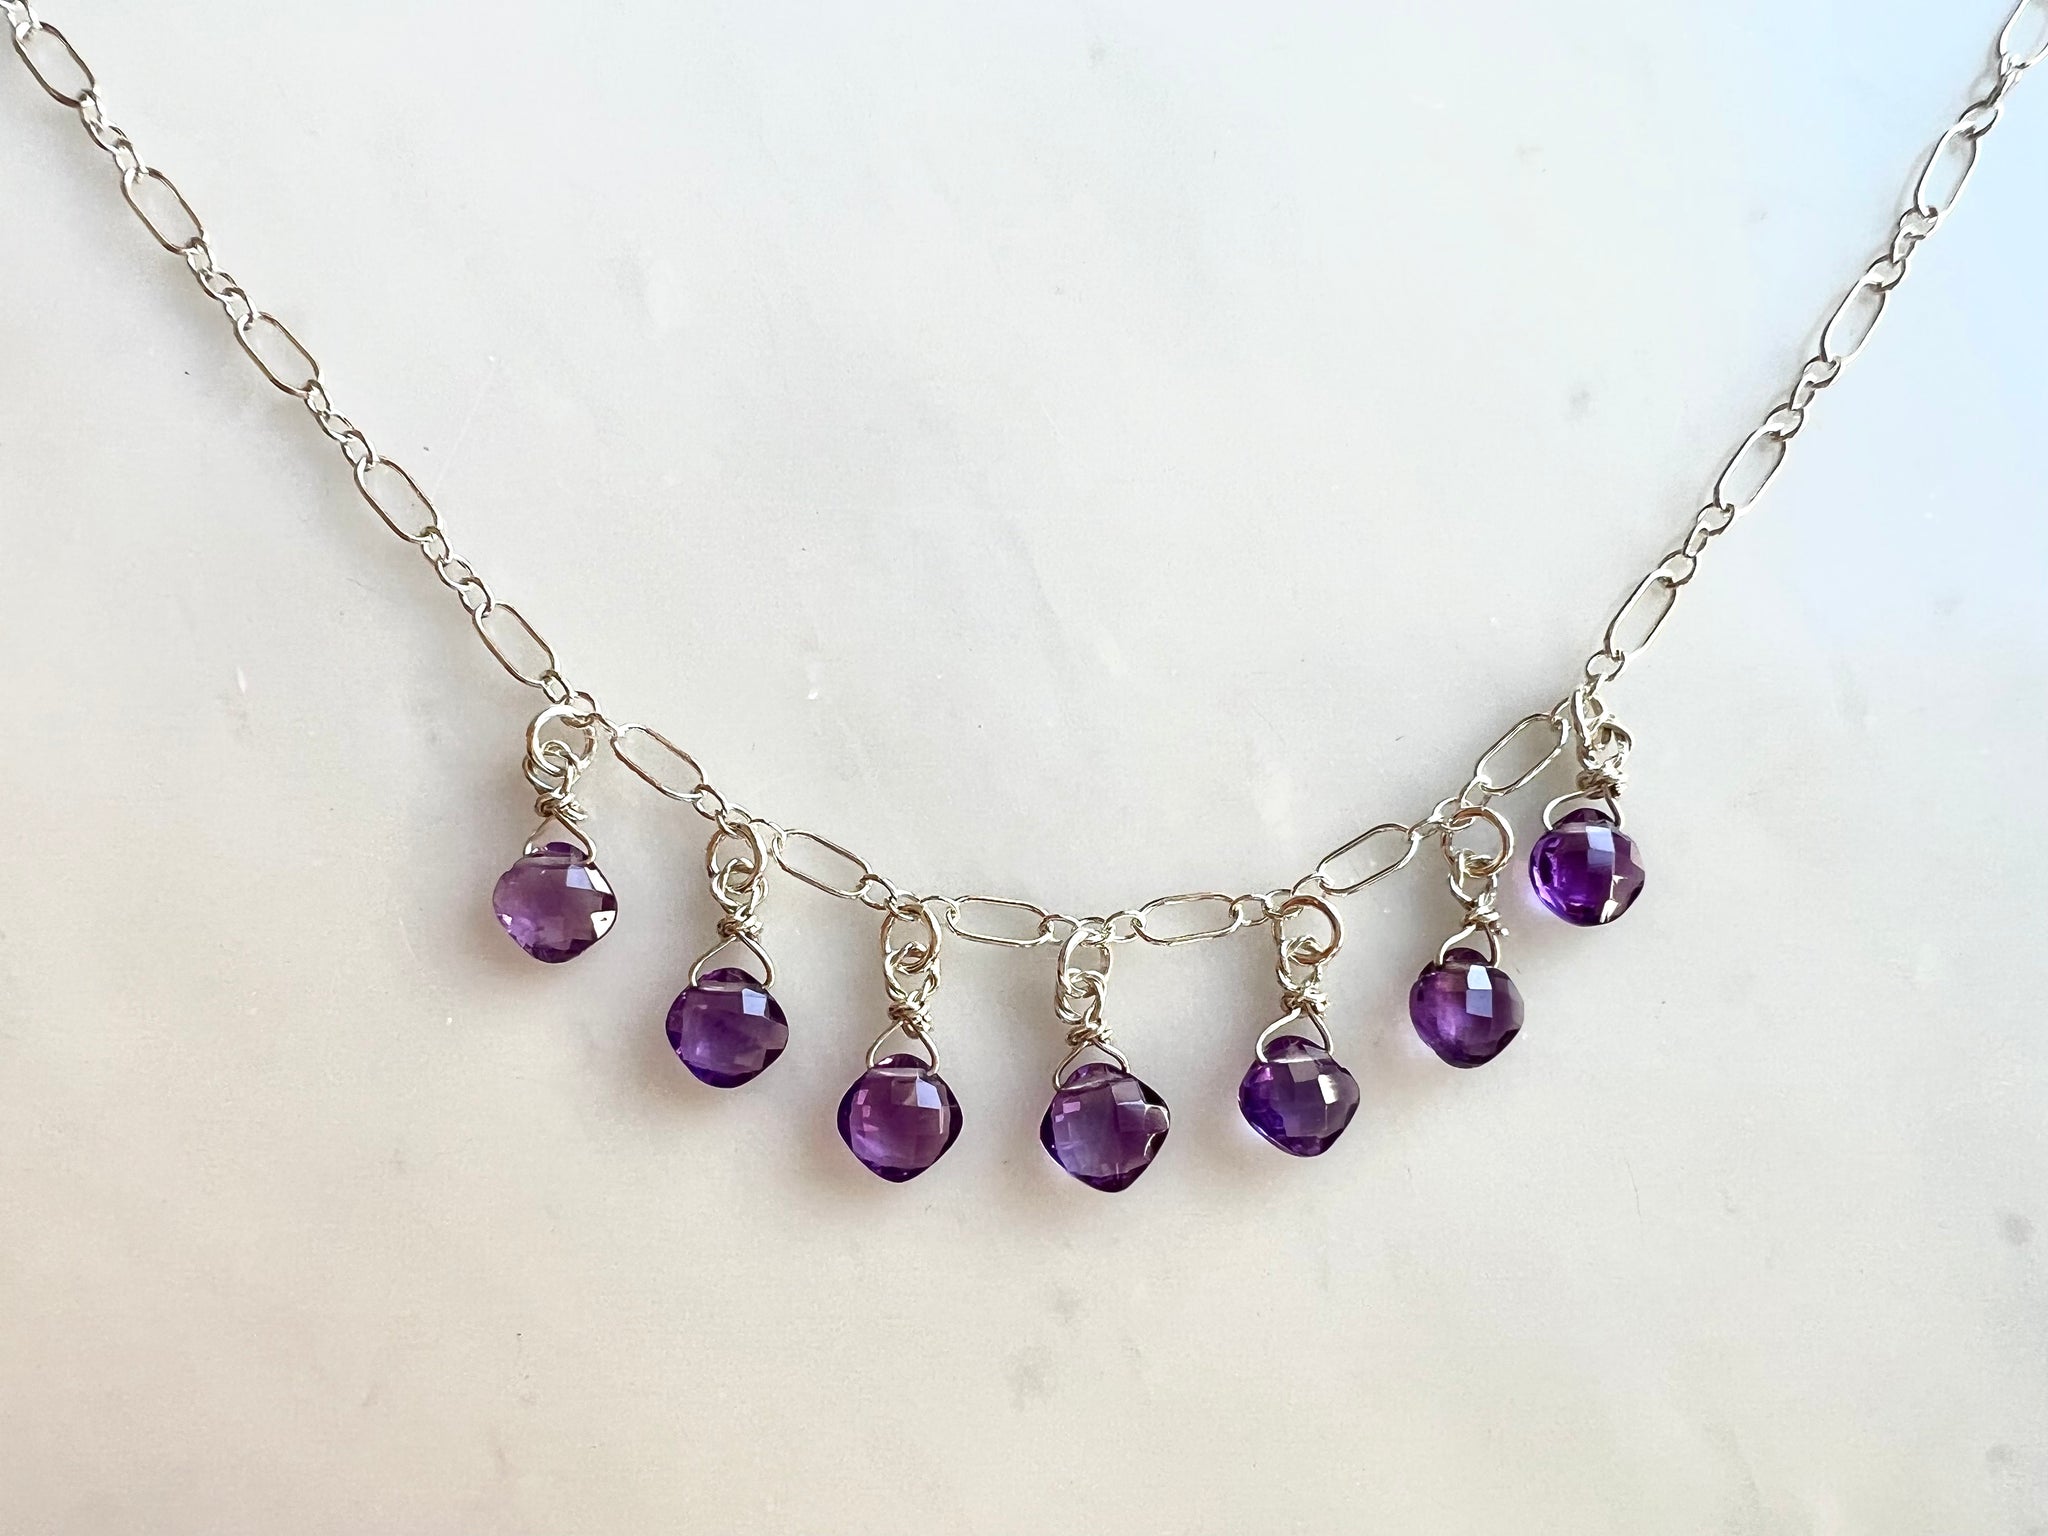 Square Cut Amethyst Necklace Sterling Silver 925 / スクエアカット　アメジスト　ネックレス　スターリングシルバー 925